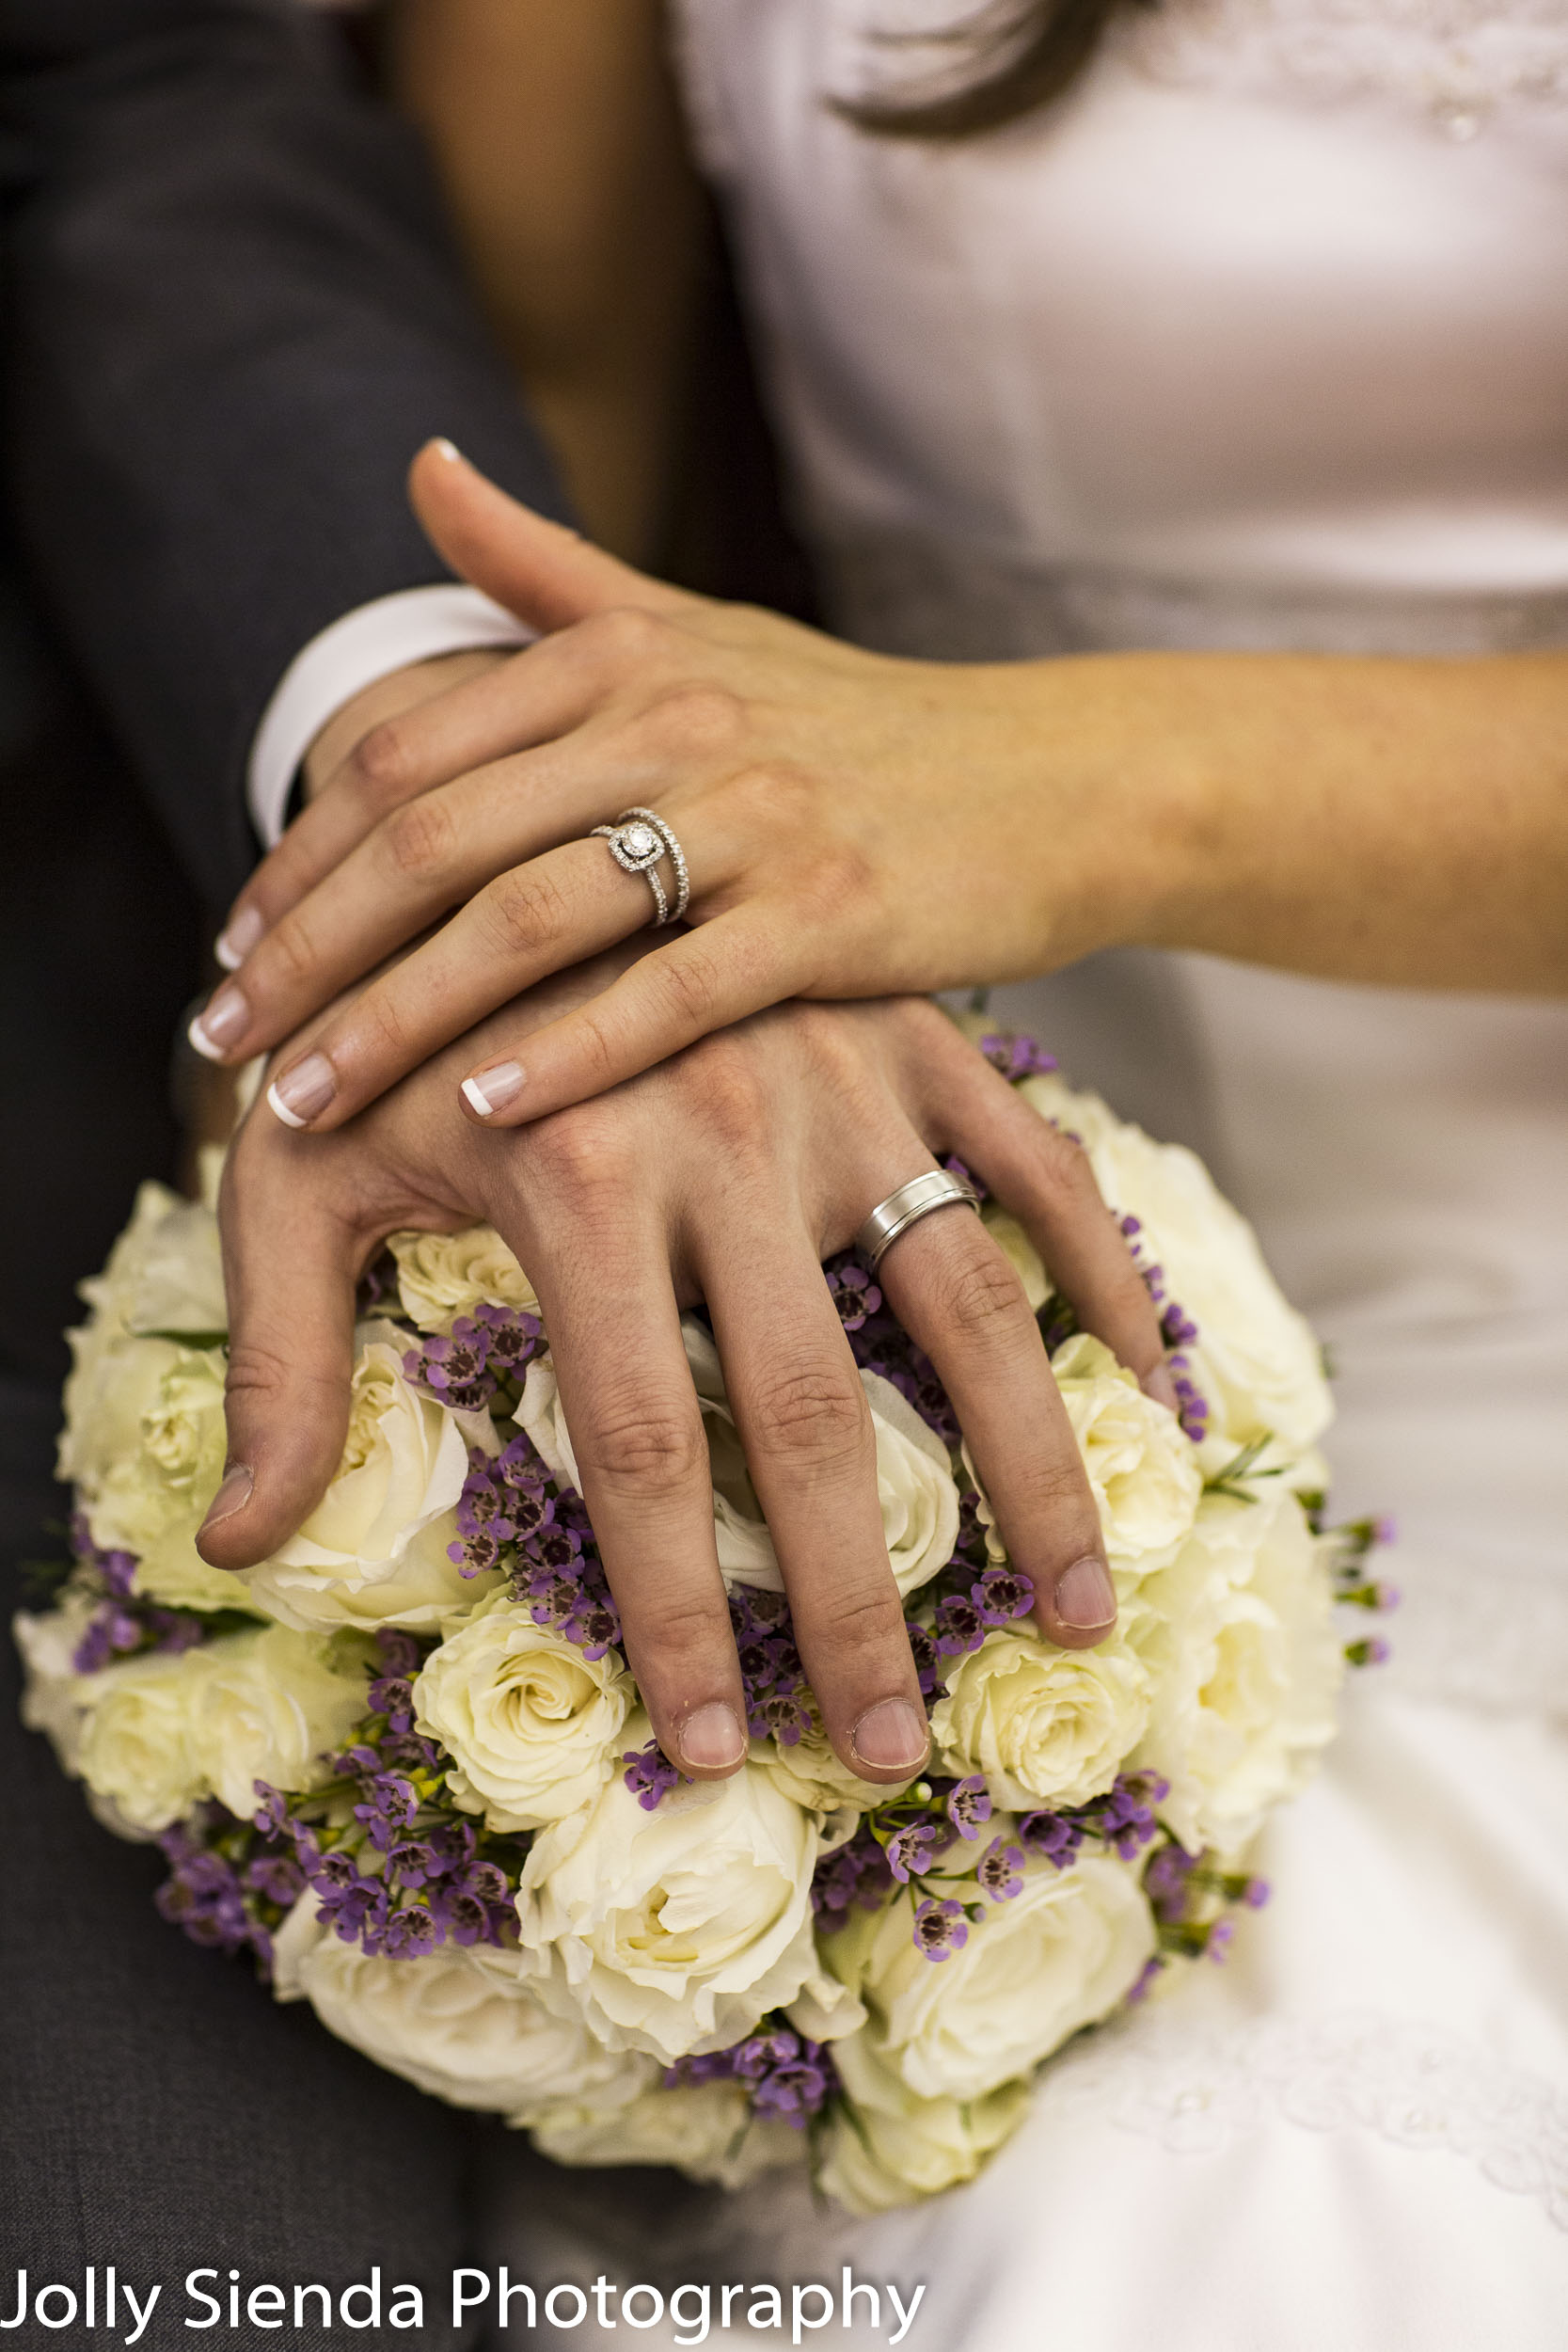 Hands clasped with his and her diamond wedding rings over weddin